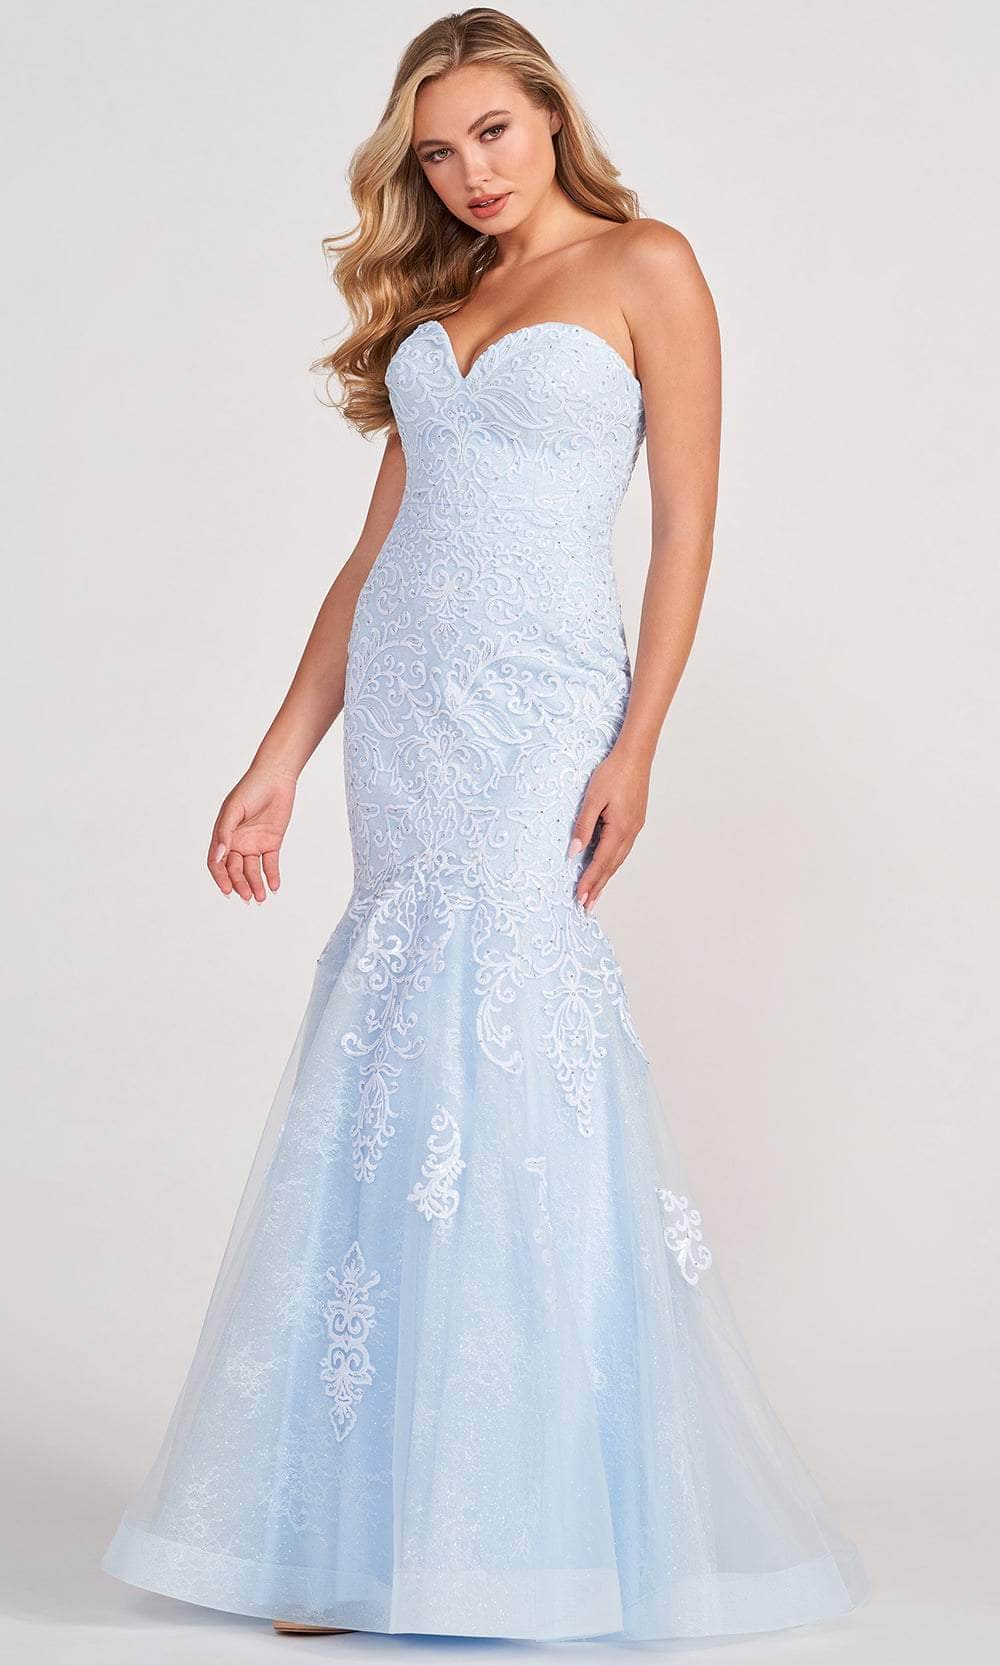 Colette By Daphne CL2005 - Strapless Mermaid Prom Gown
